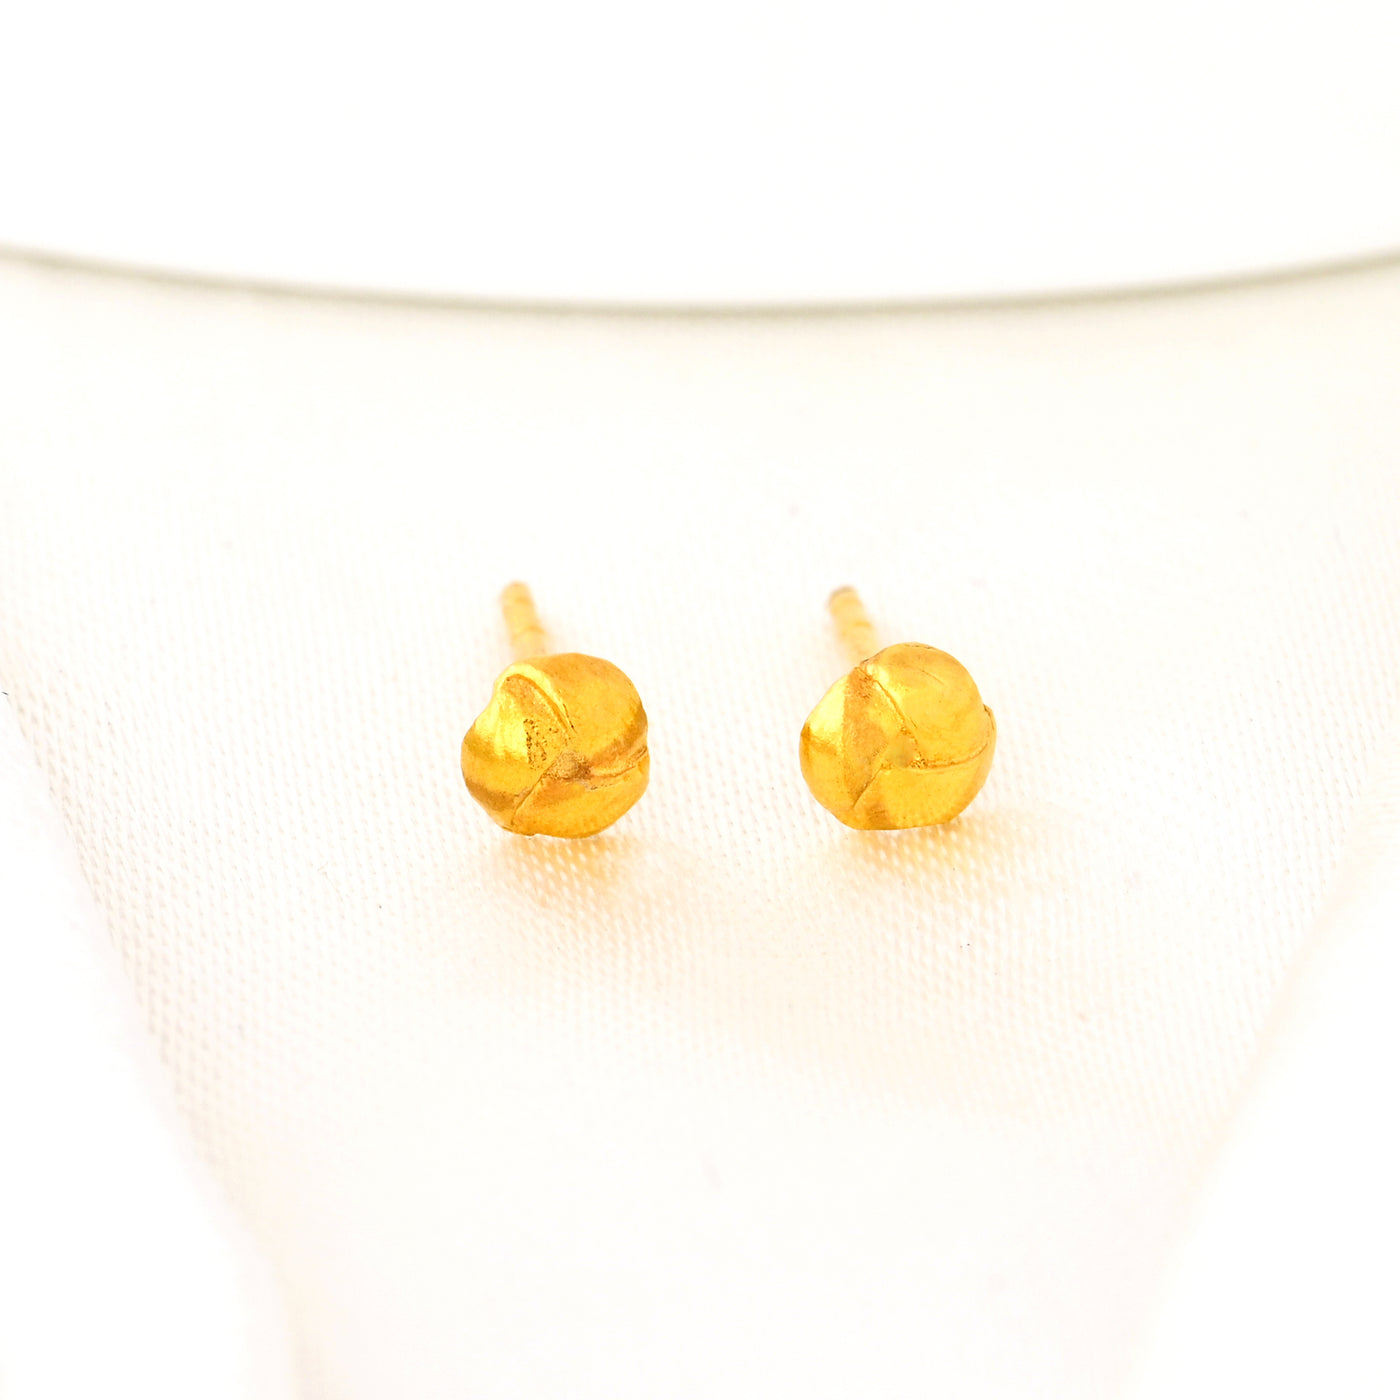 Minimalist Gold Knot Stud Earrings - Gold and Silver